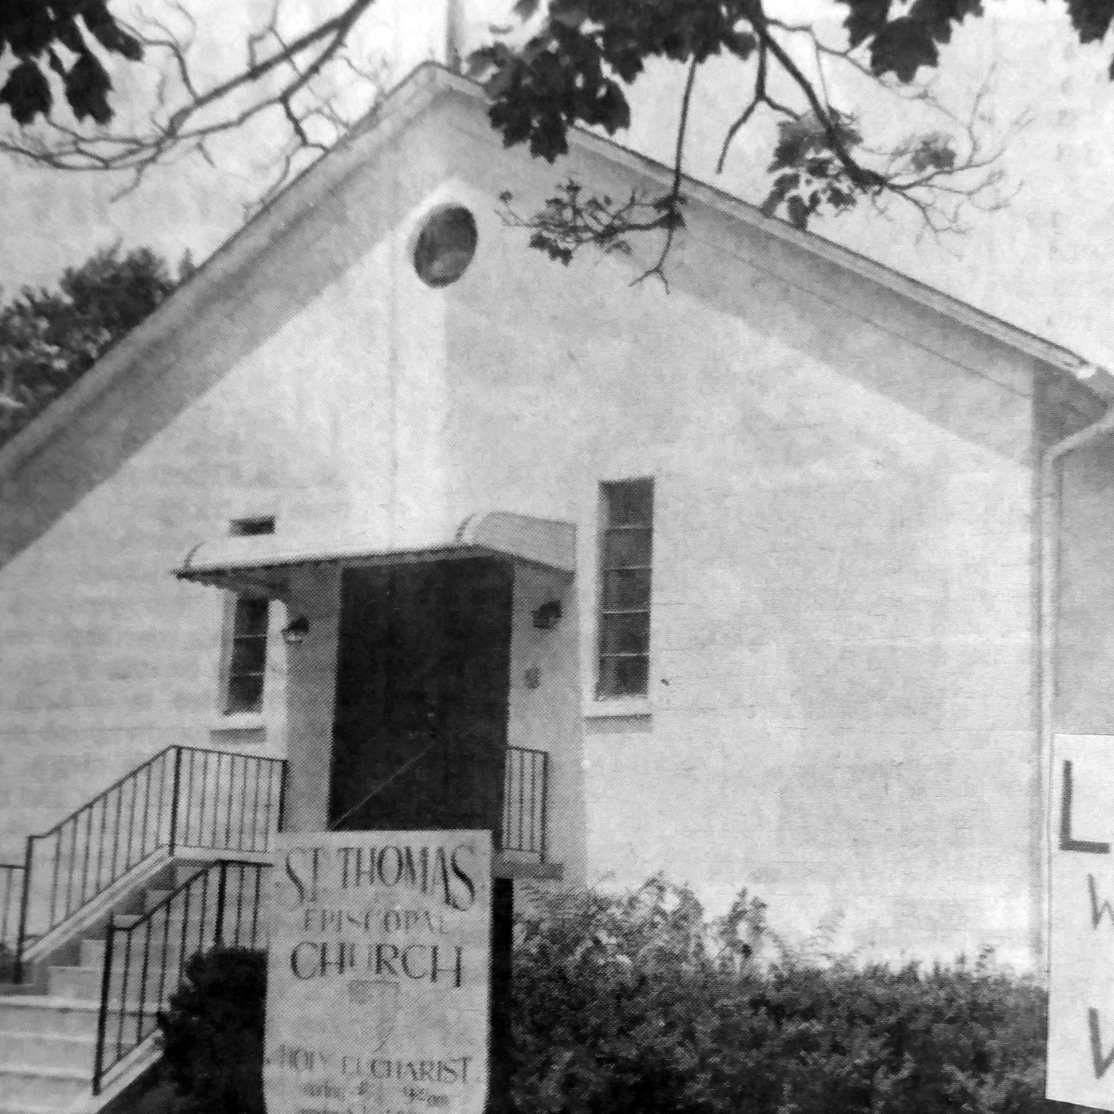 An old black and white picture of the St. Thomas Church